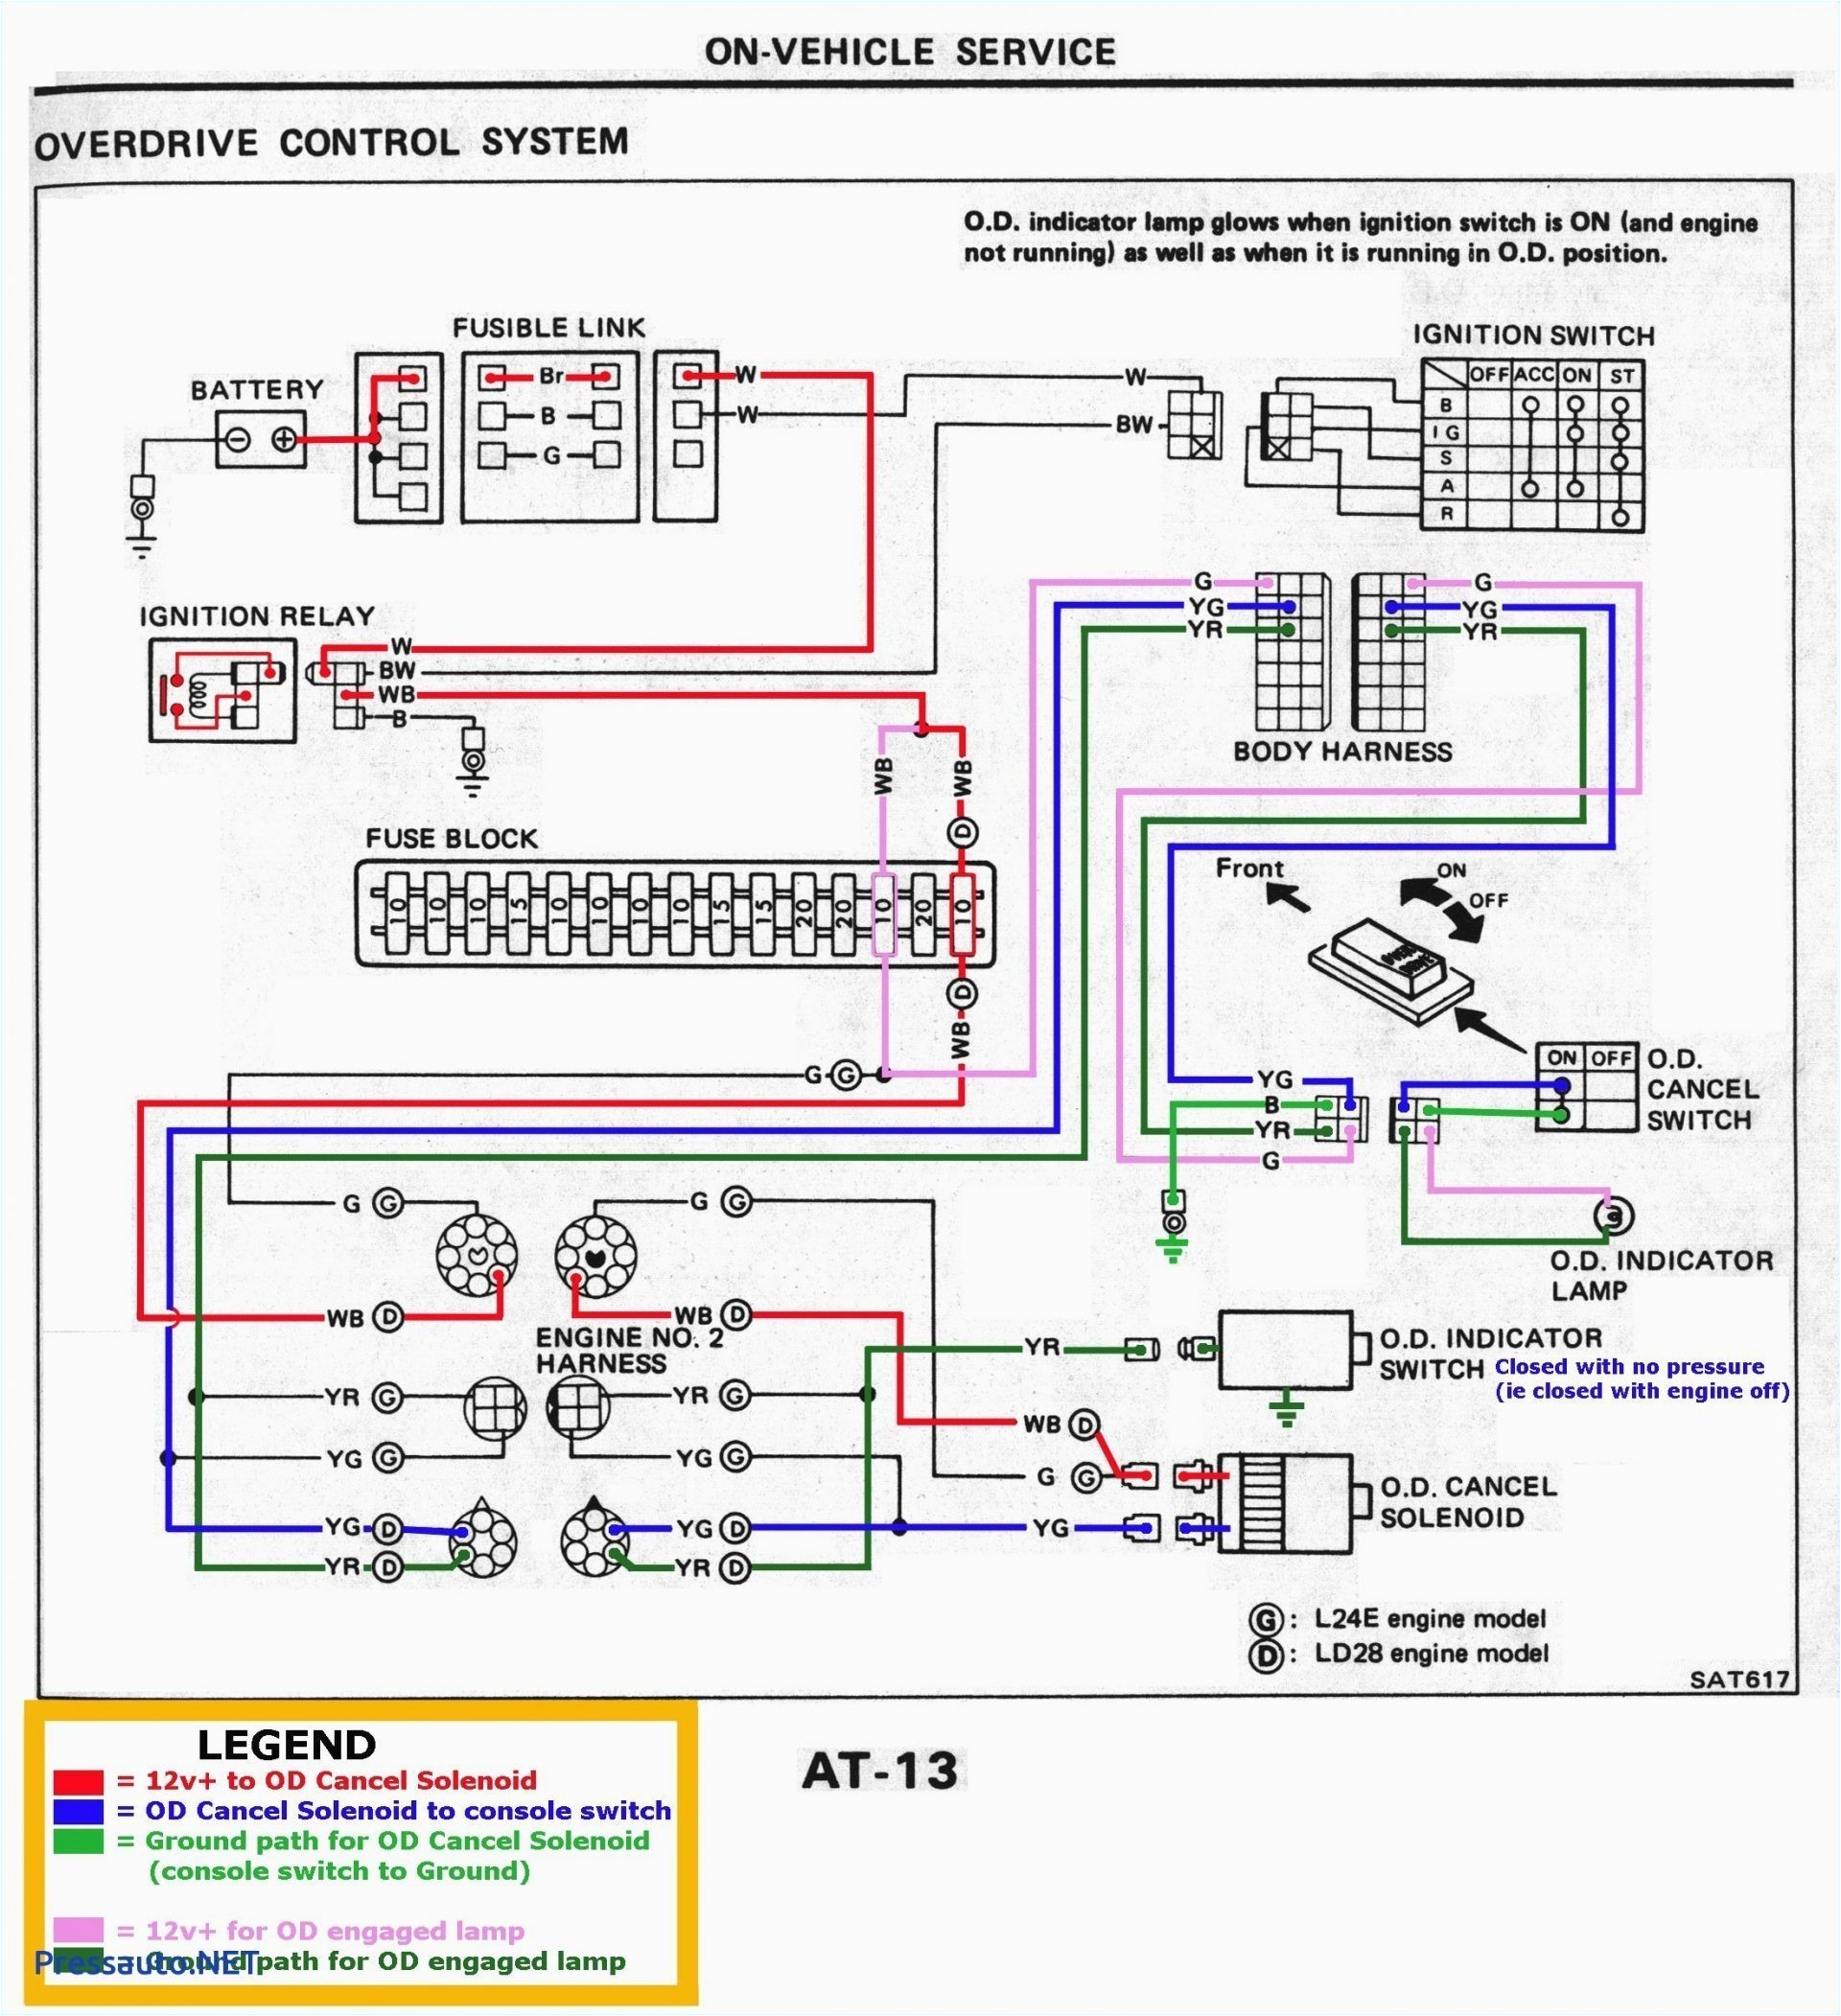 wiring harness interview questions wiring diagram schematic house wiring harness wiring diagram electrical wiring harness interview